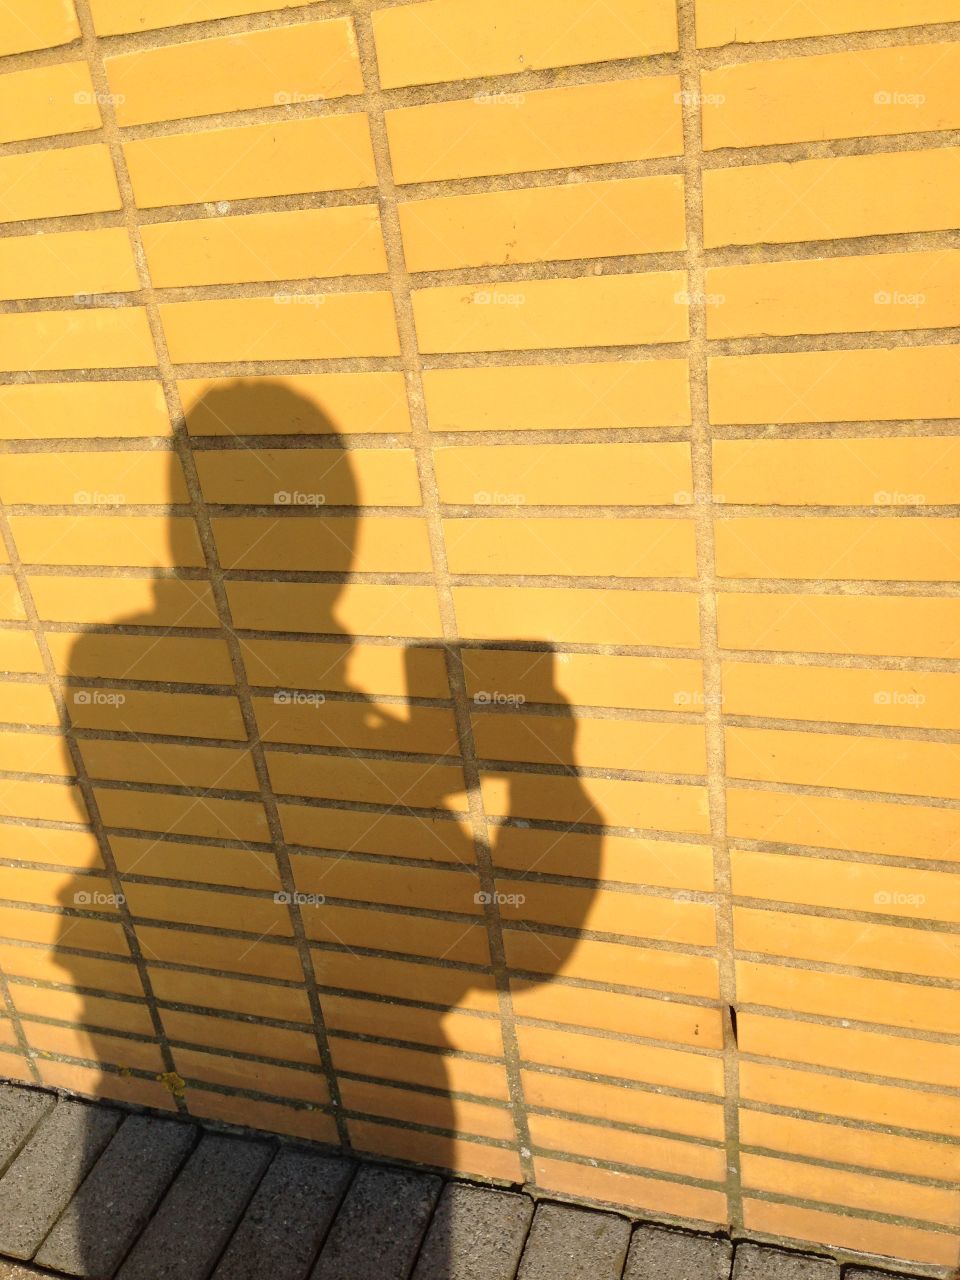 Shadow of me taking a picture of a yellow brick wall.